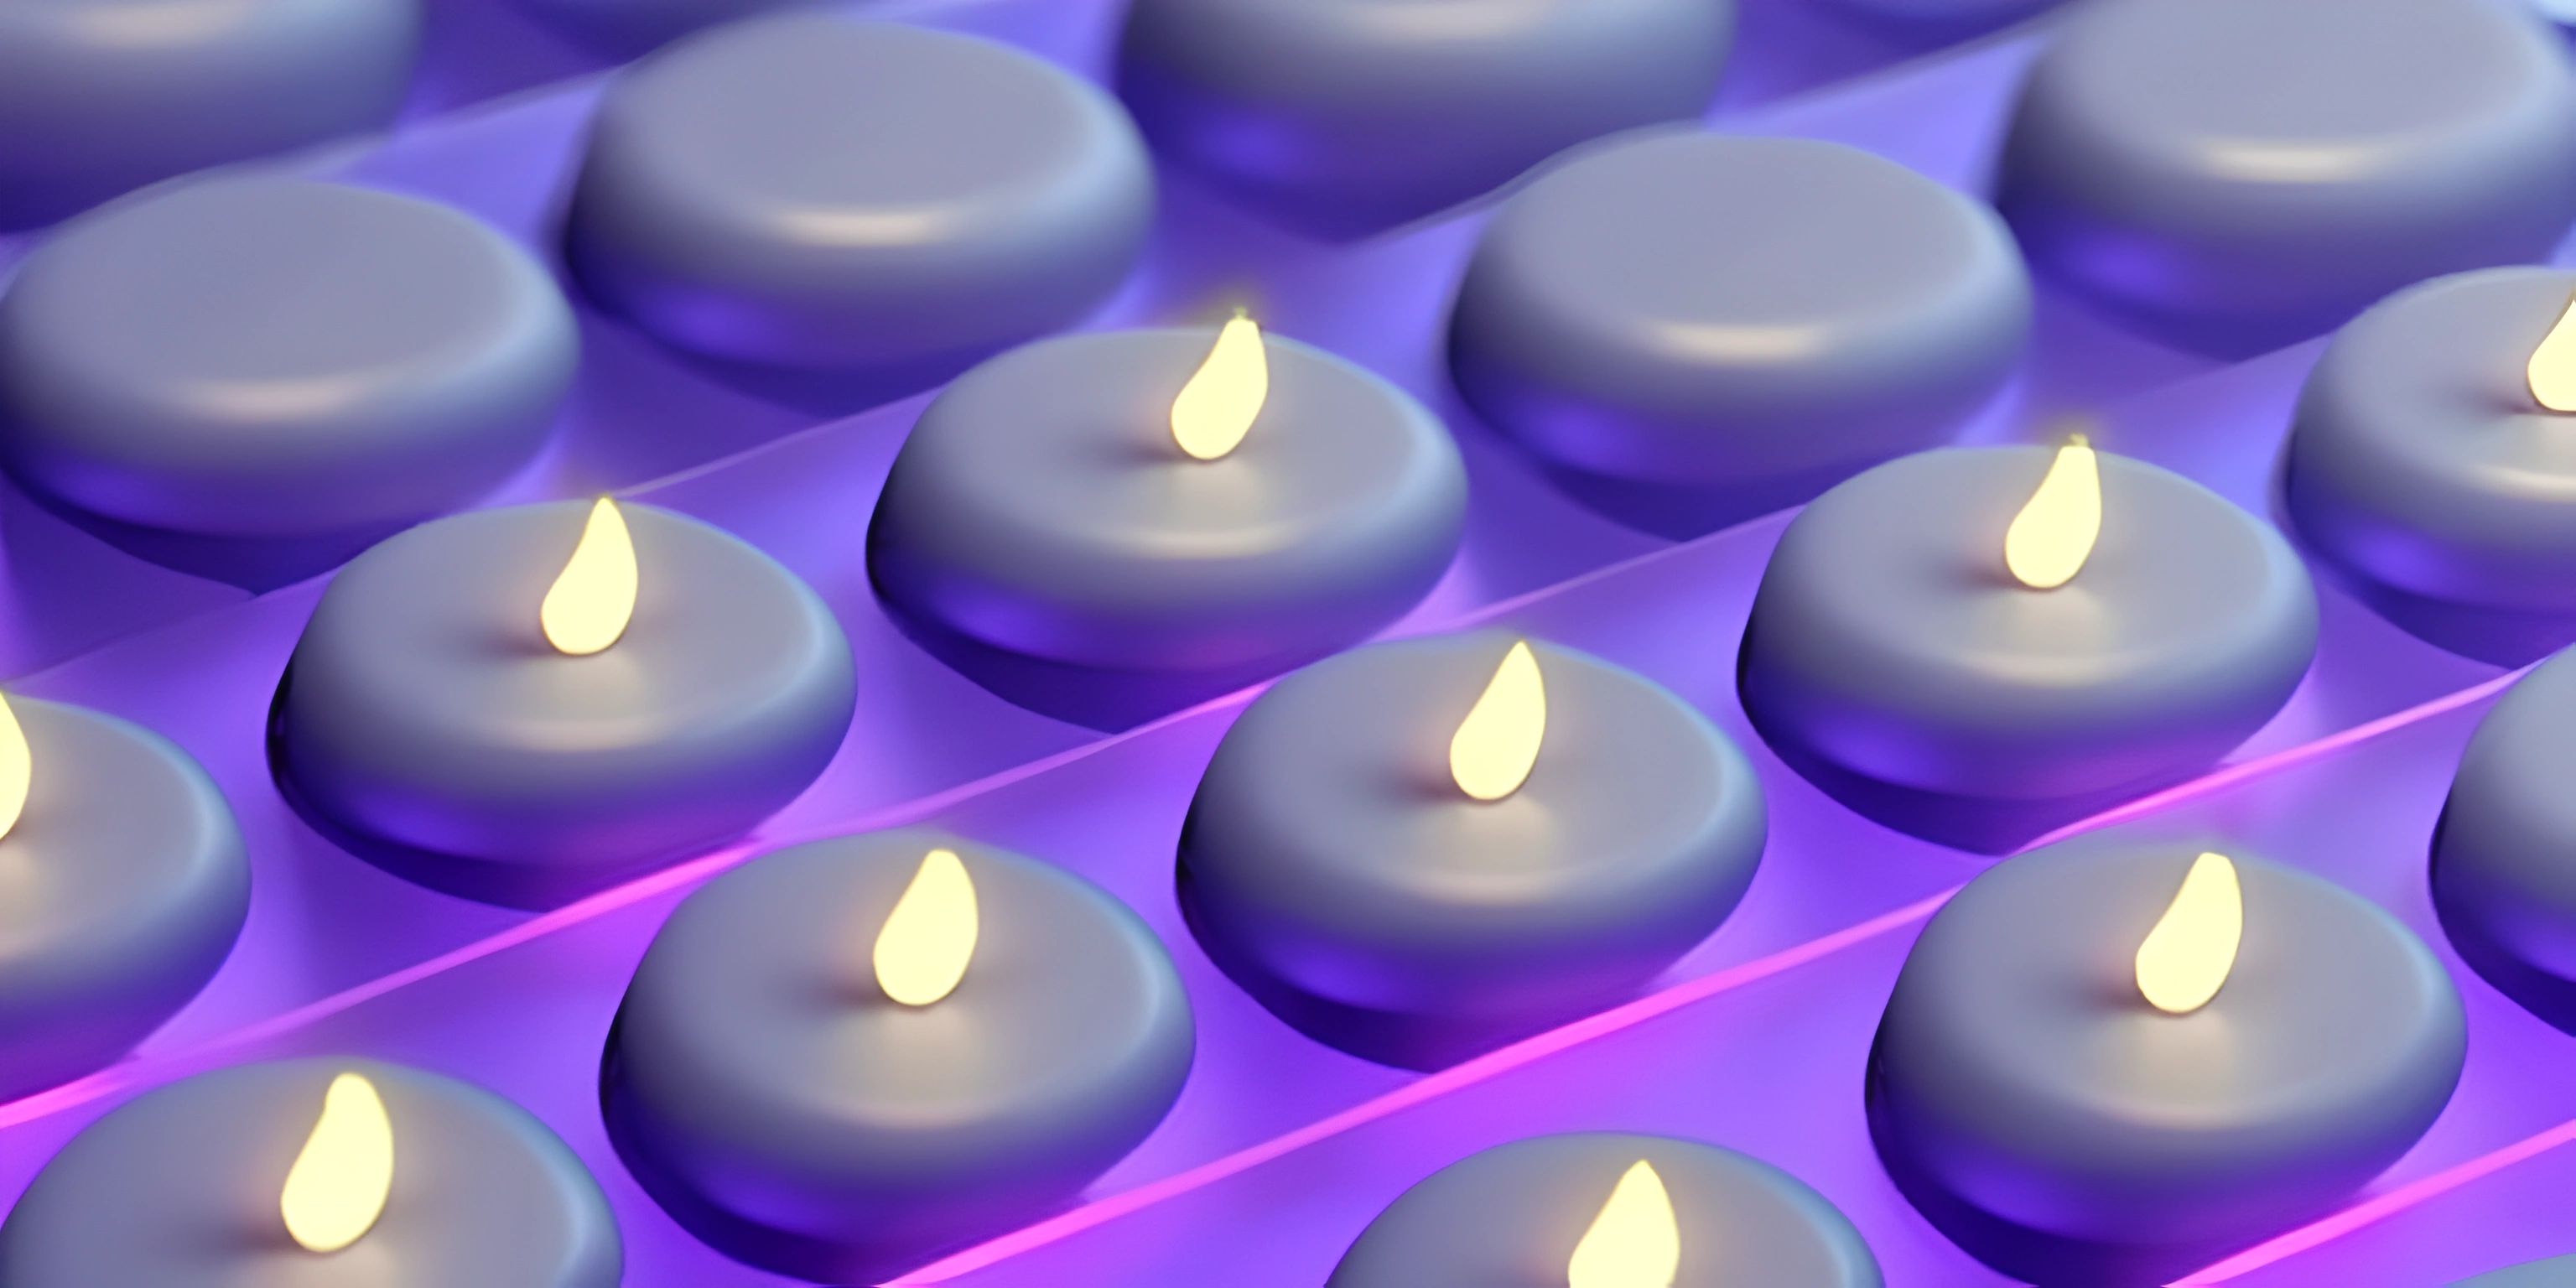 many blue candles are lit kathmanduing on a glass table top in purple light and bright